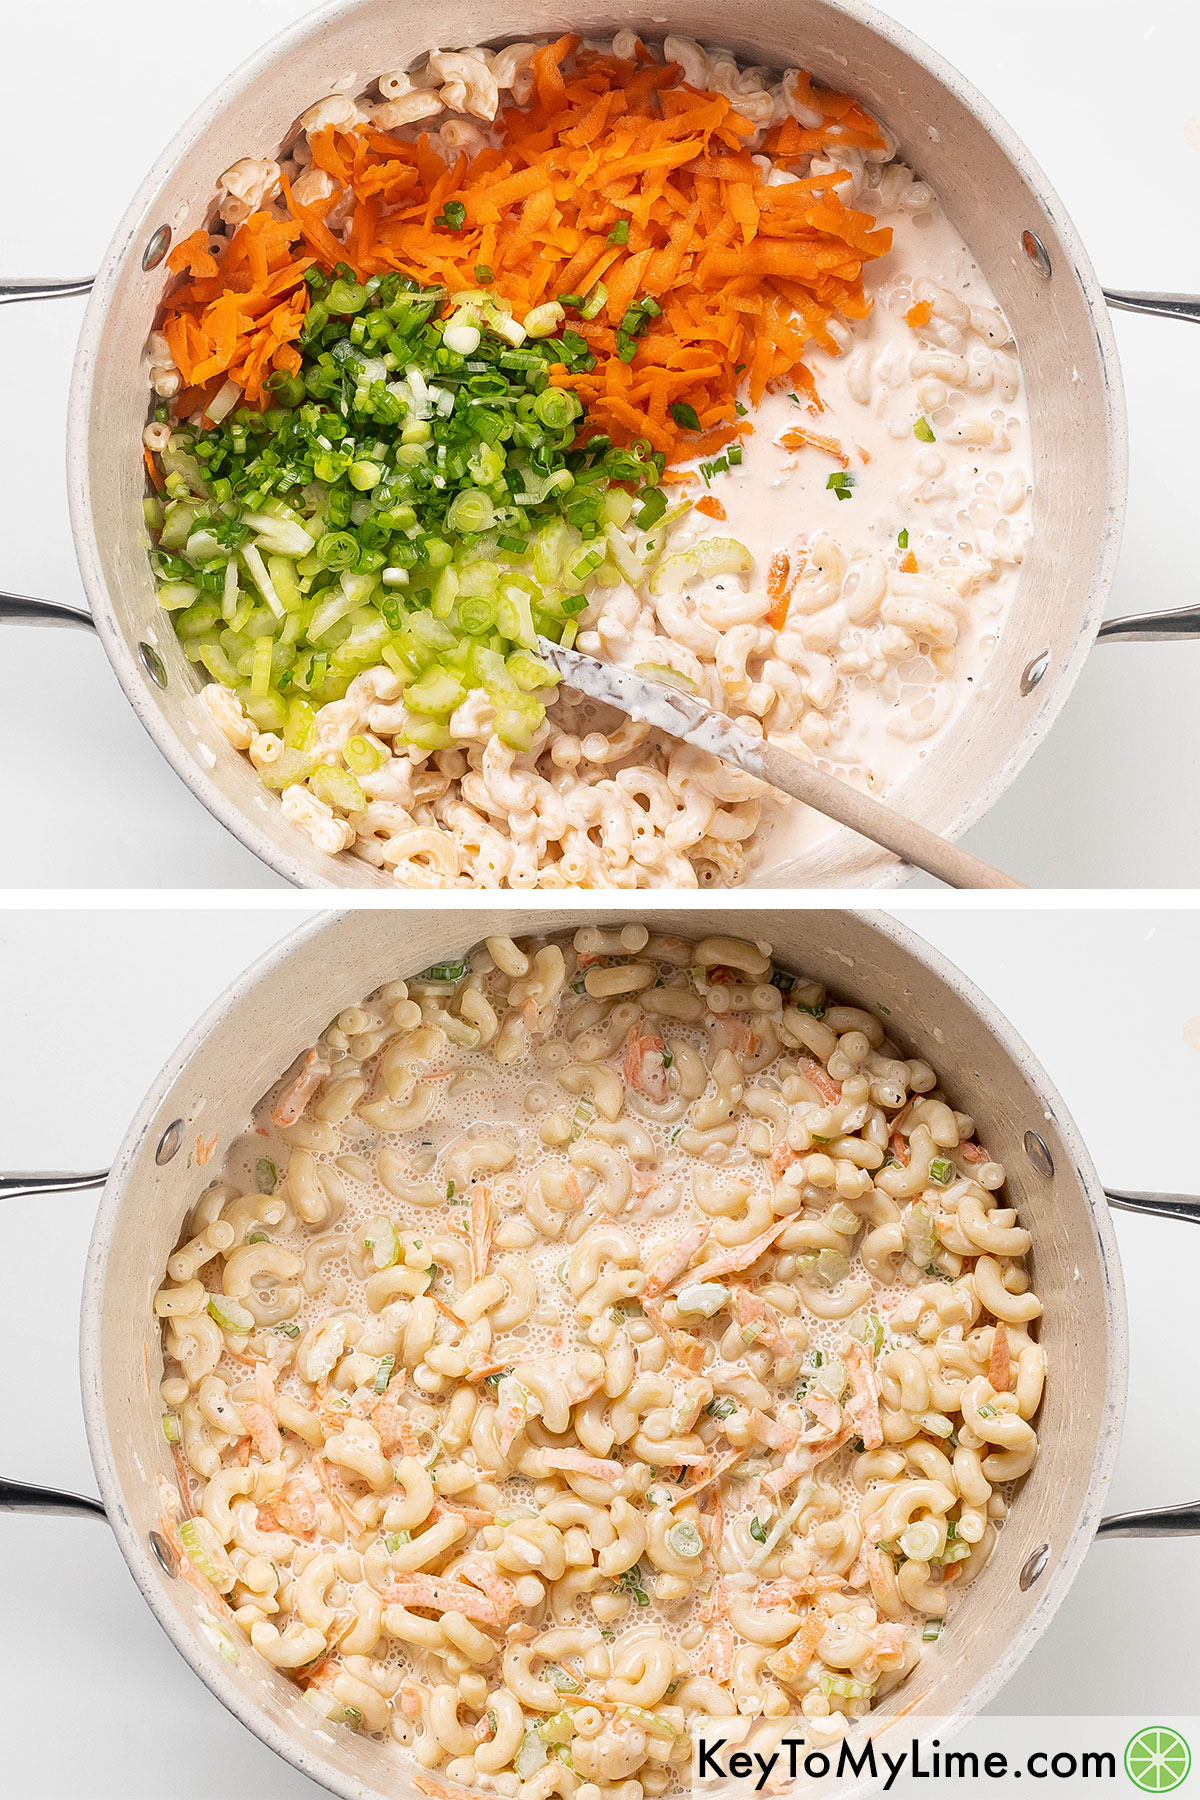 Adding grated carrots, onion and celery to the pot with the remaining dressing and then mixing all the ingredients together.